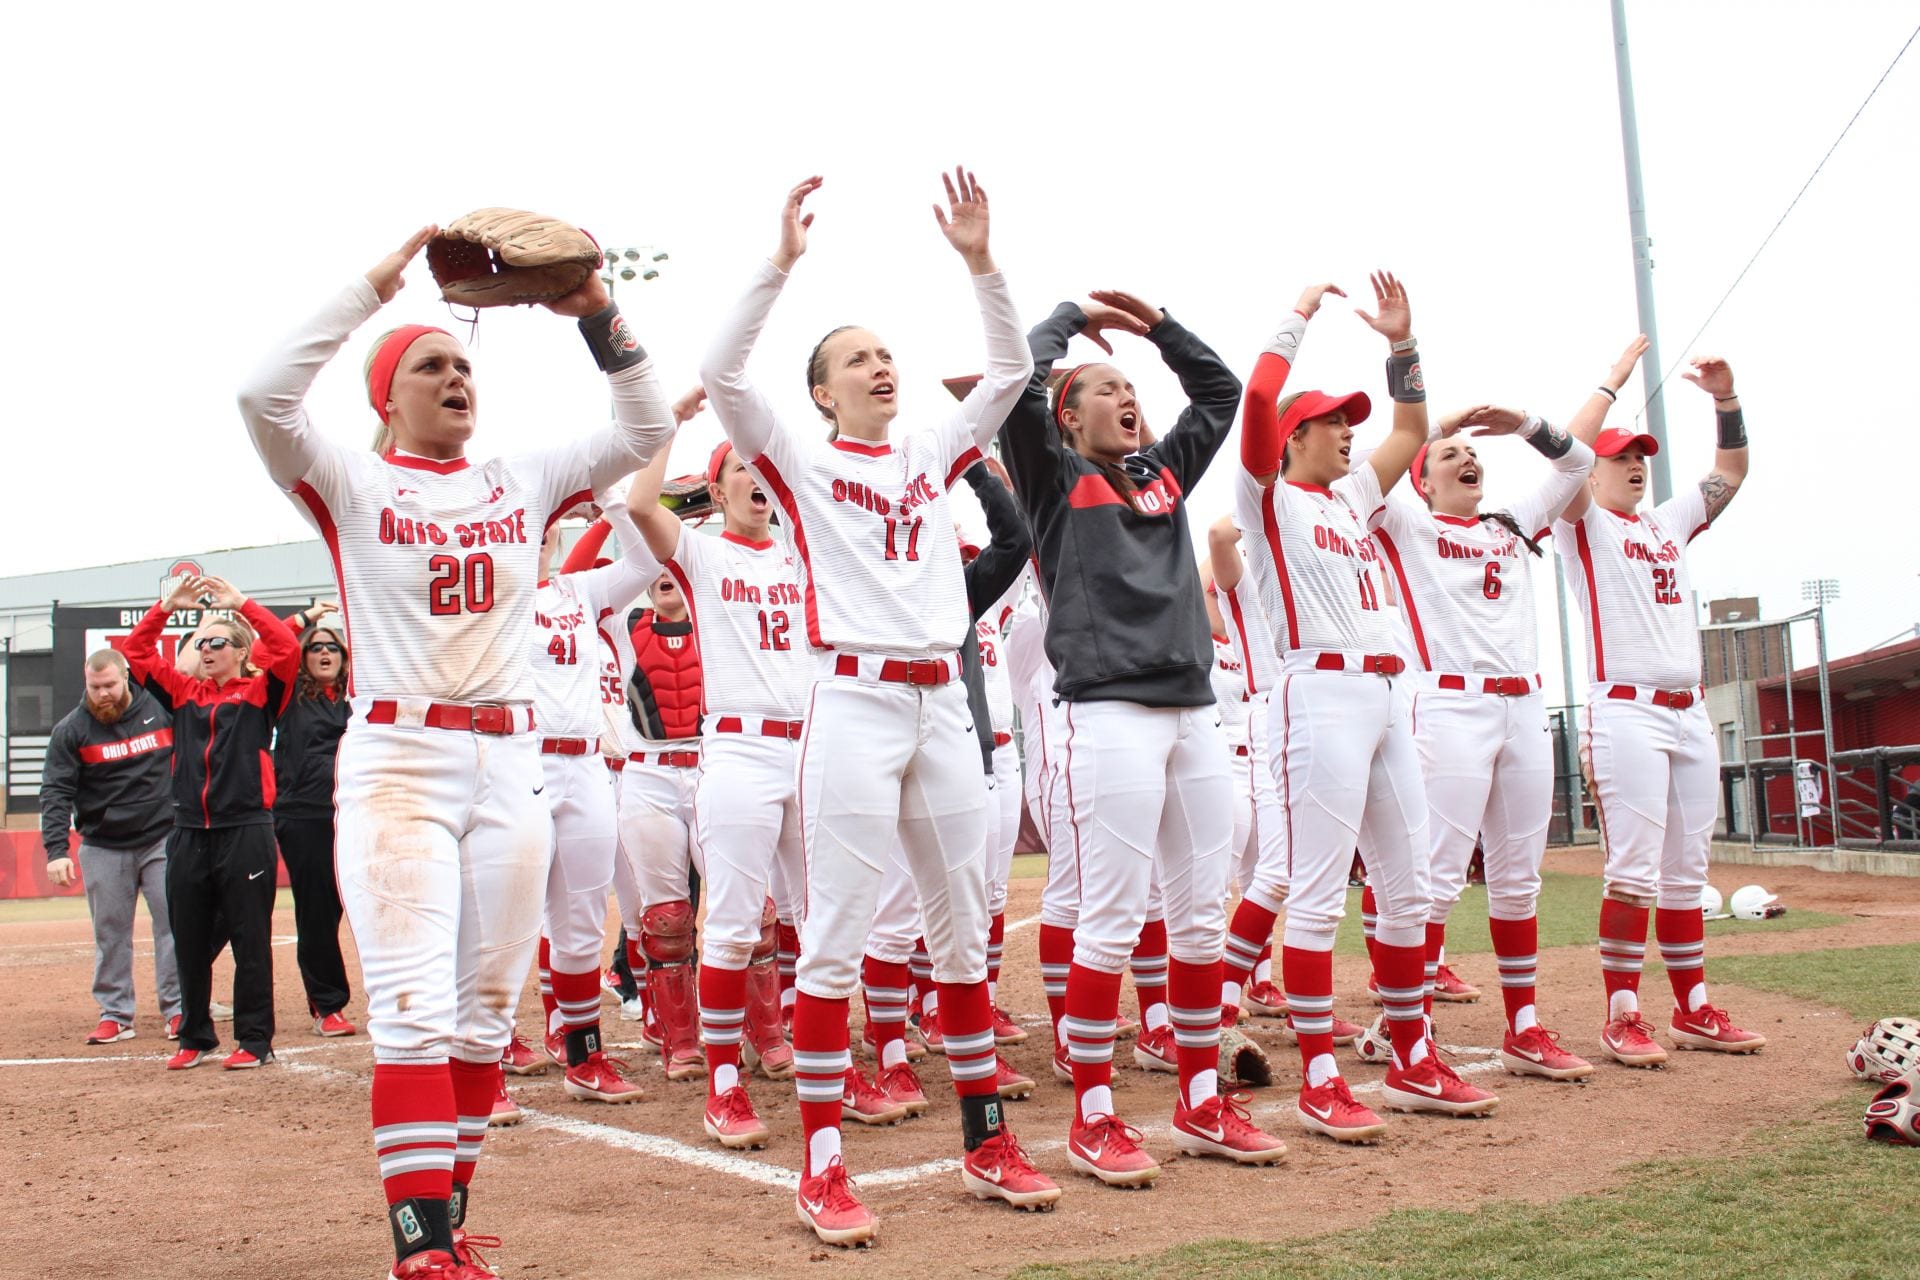 Softball Buckeyes bats come alive in Game 1, split final doubleheader